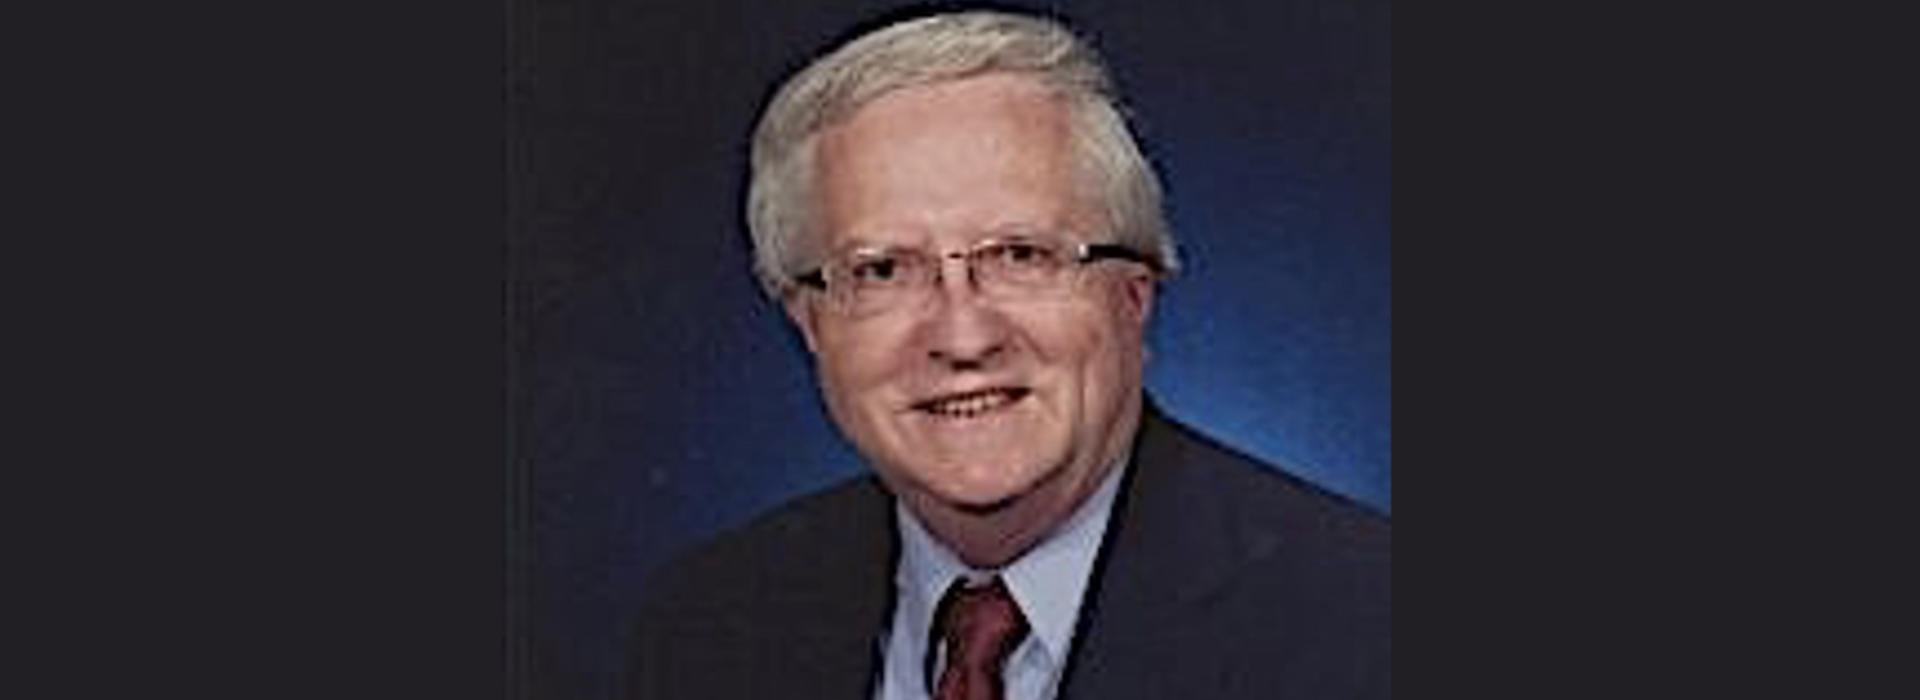 Donald Connelly